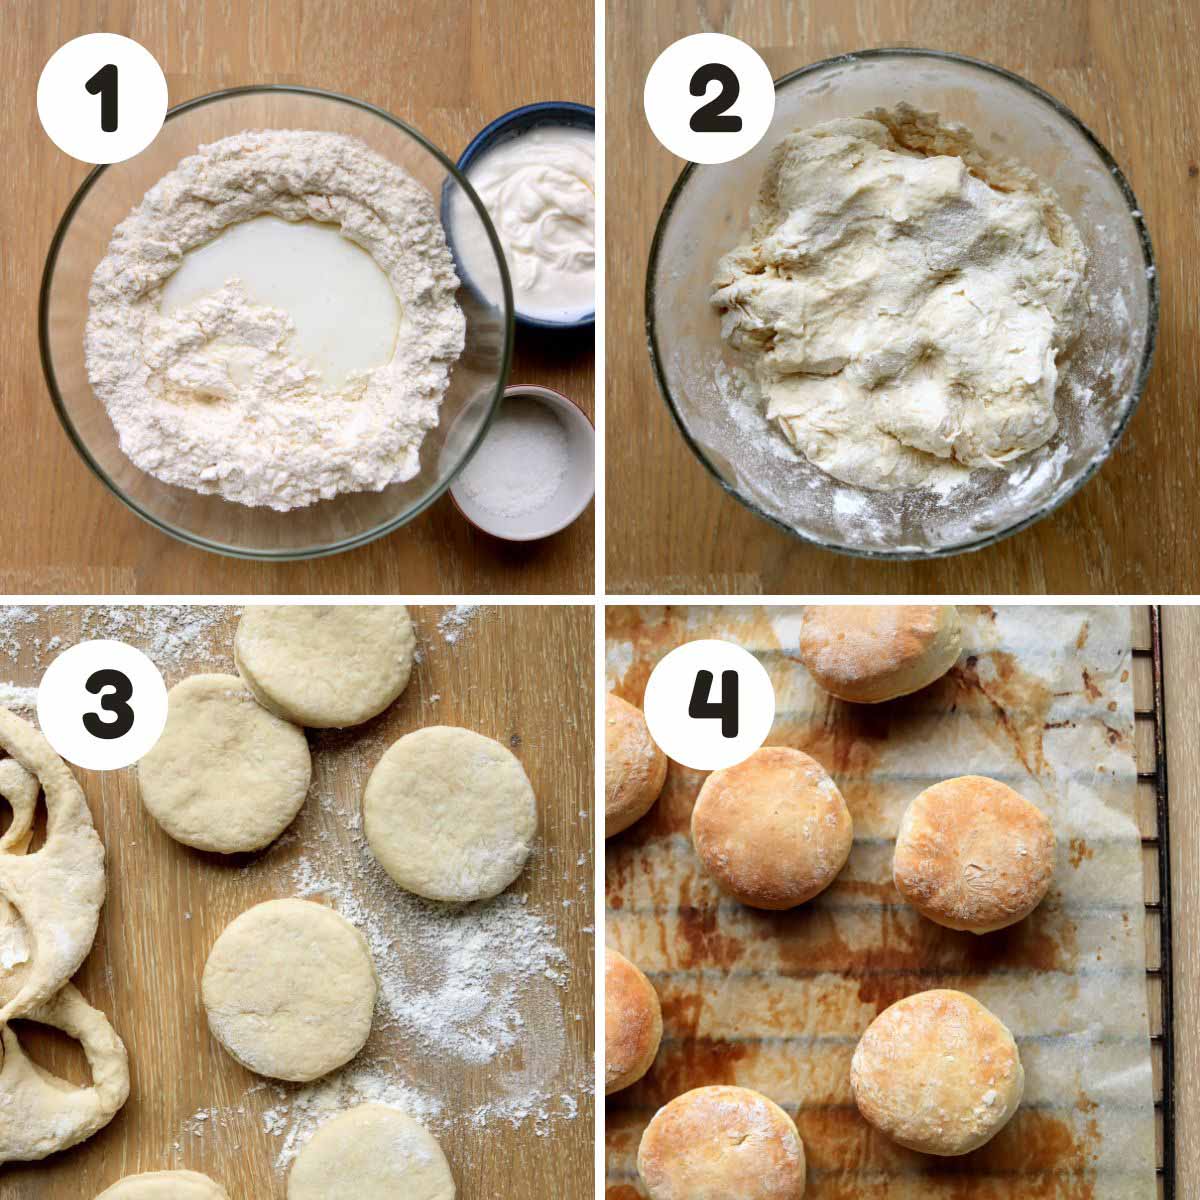 Steps to make the biscuits.